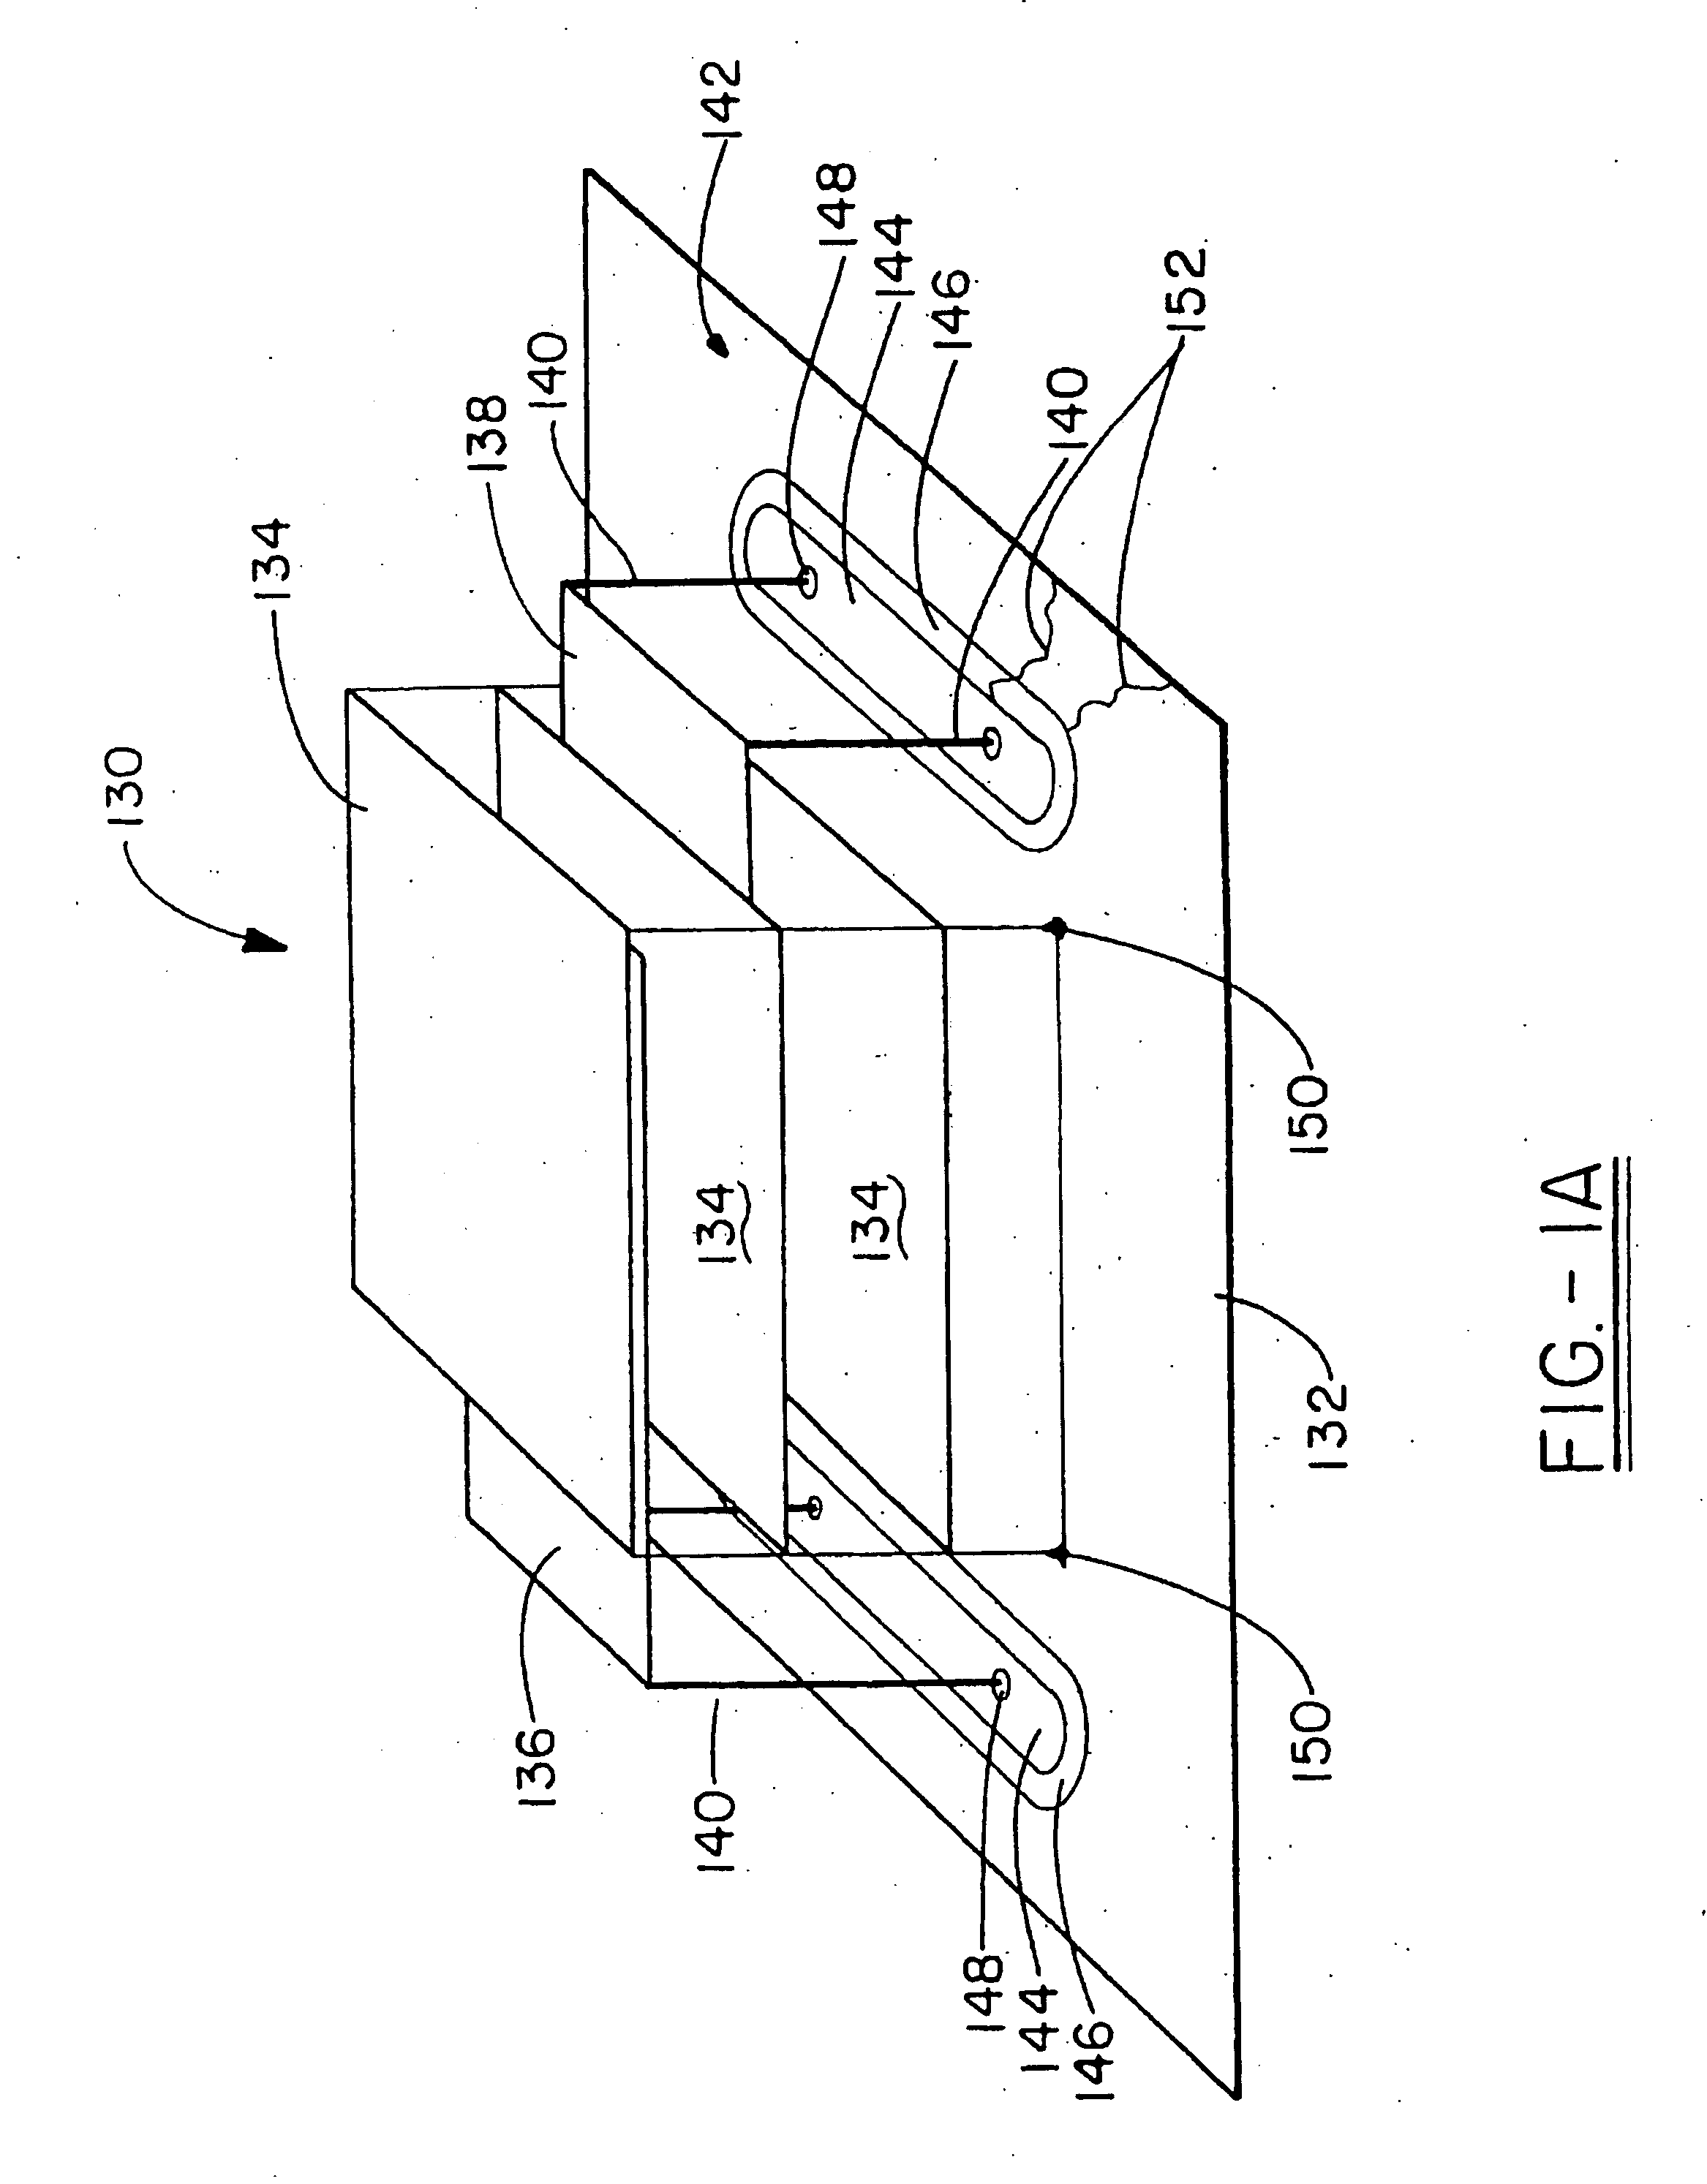 Energy conditioning circuit assembly and component carrier